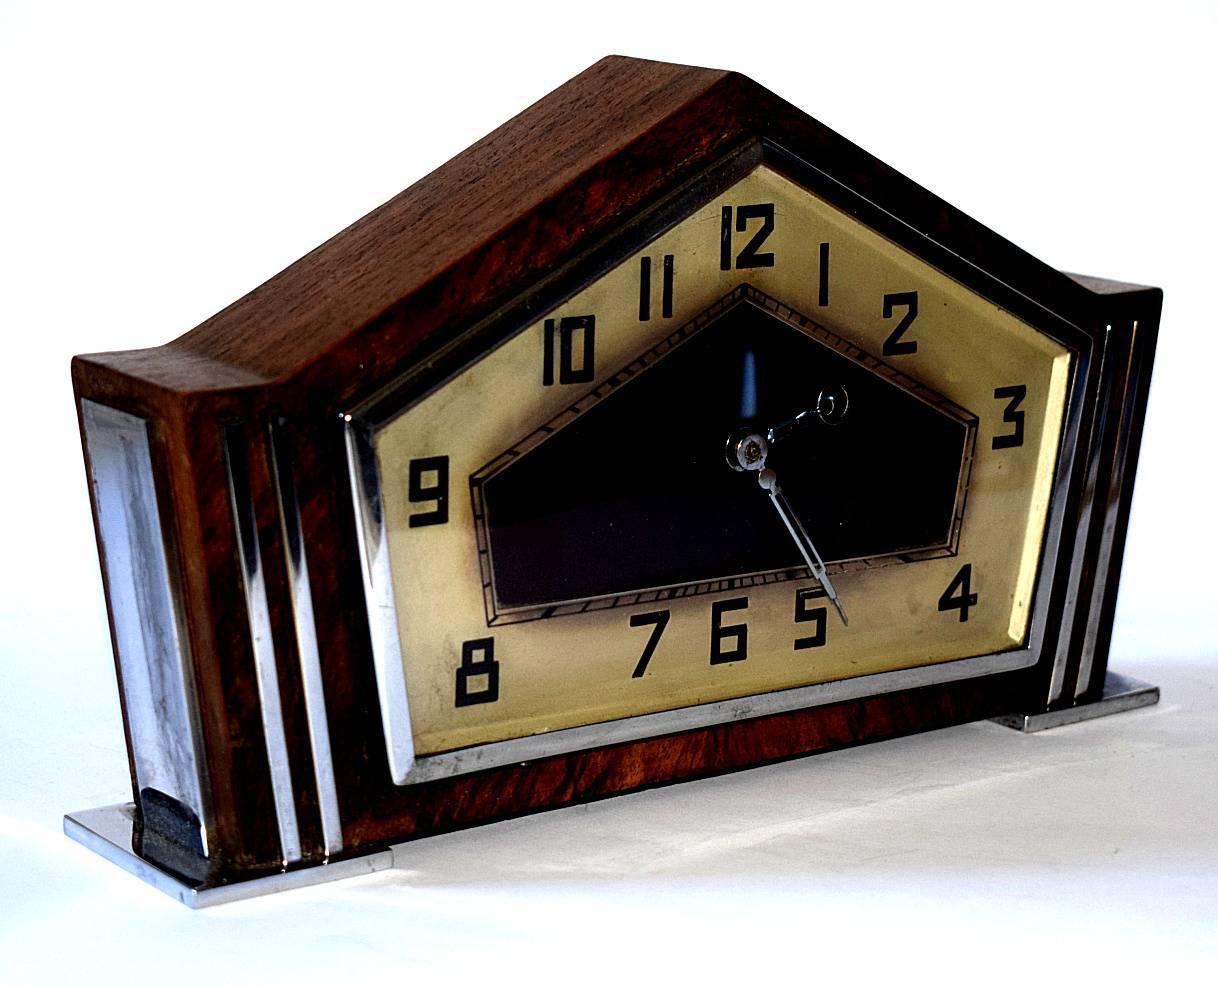 Very stylish 1930s English Walnut and chrome clock. Fully serviced by our horologist this 8 day clock keeps very good time and has a mellow tick. We've had the case re polished and the chrome cleaned up and so comes to you in excellent condition.